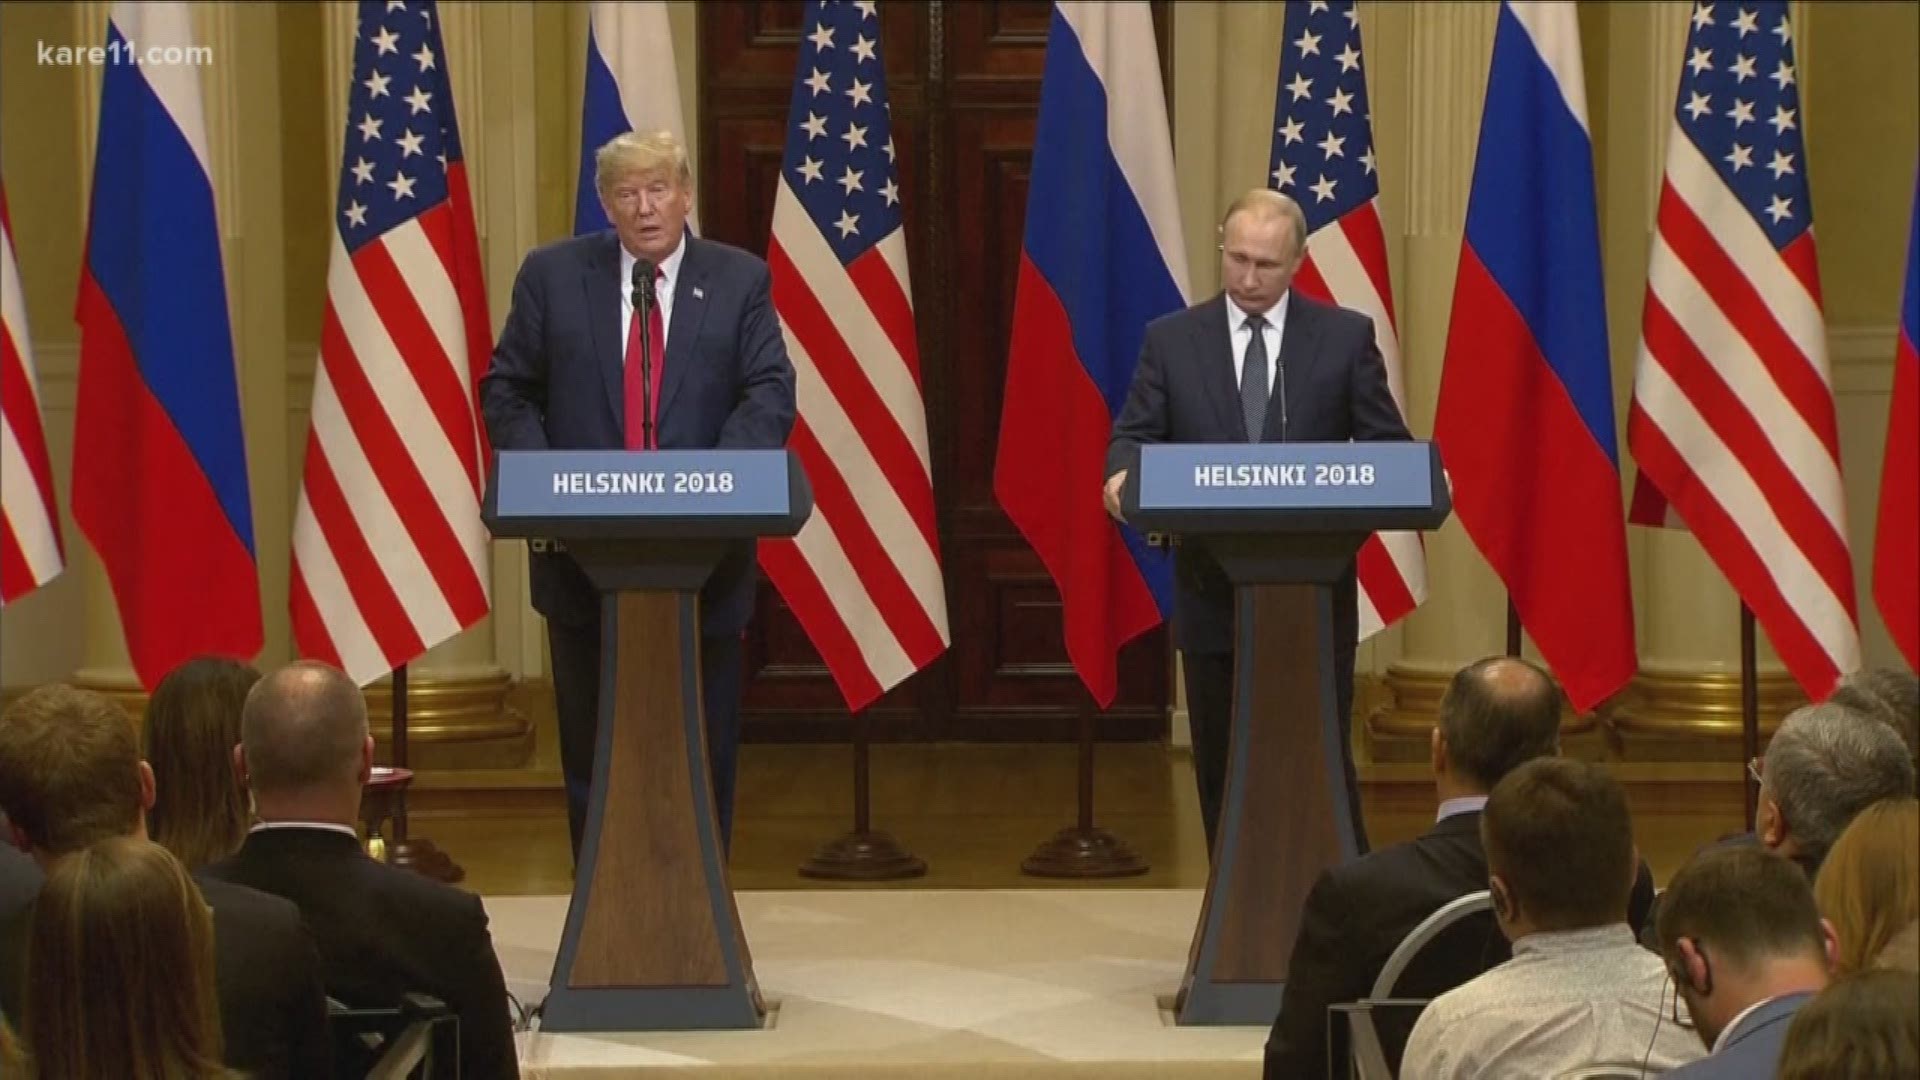 People all over the world are paying attention to the back-and-forth between Trump and Putin. KARE 11's Danny Spewak takes a closer look at that relationship, and what it means for U.S.-Russia relations.